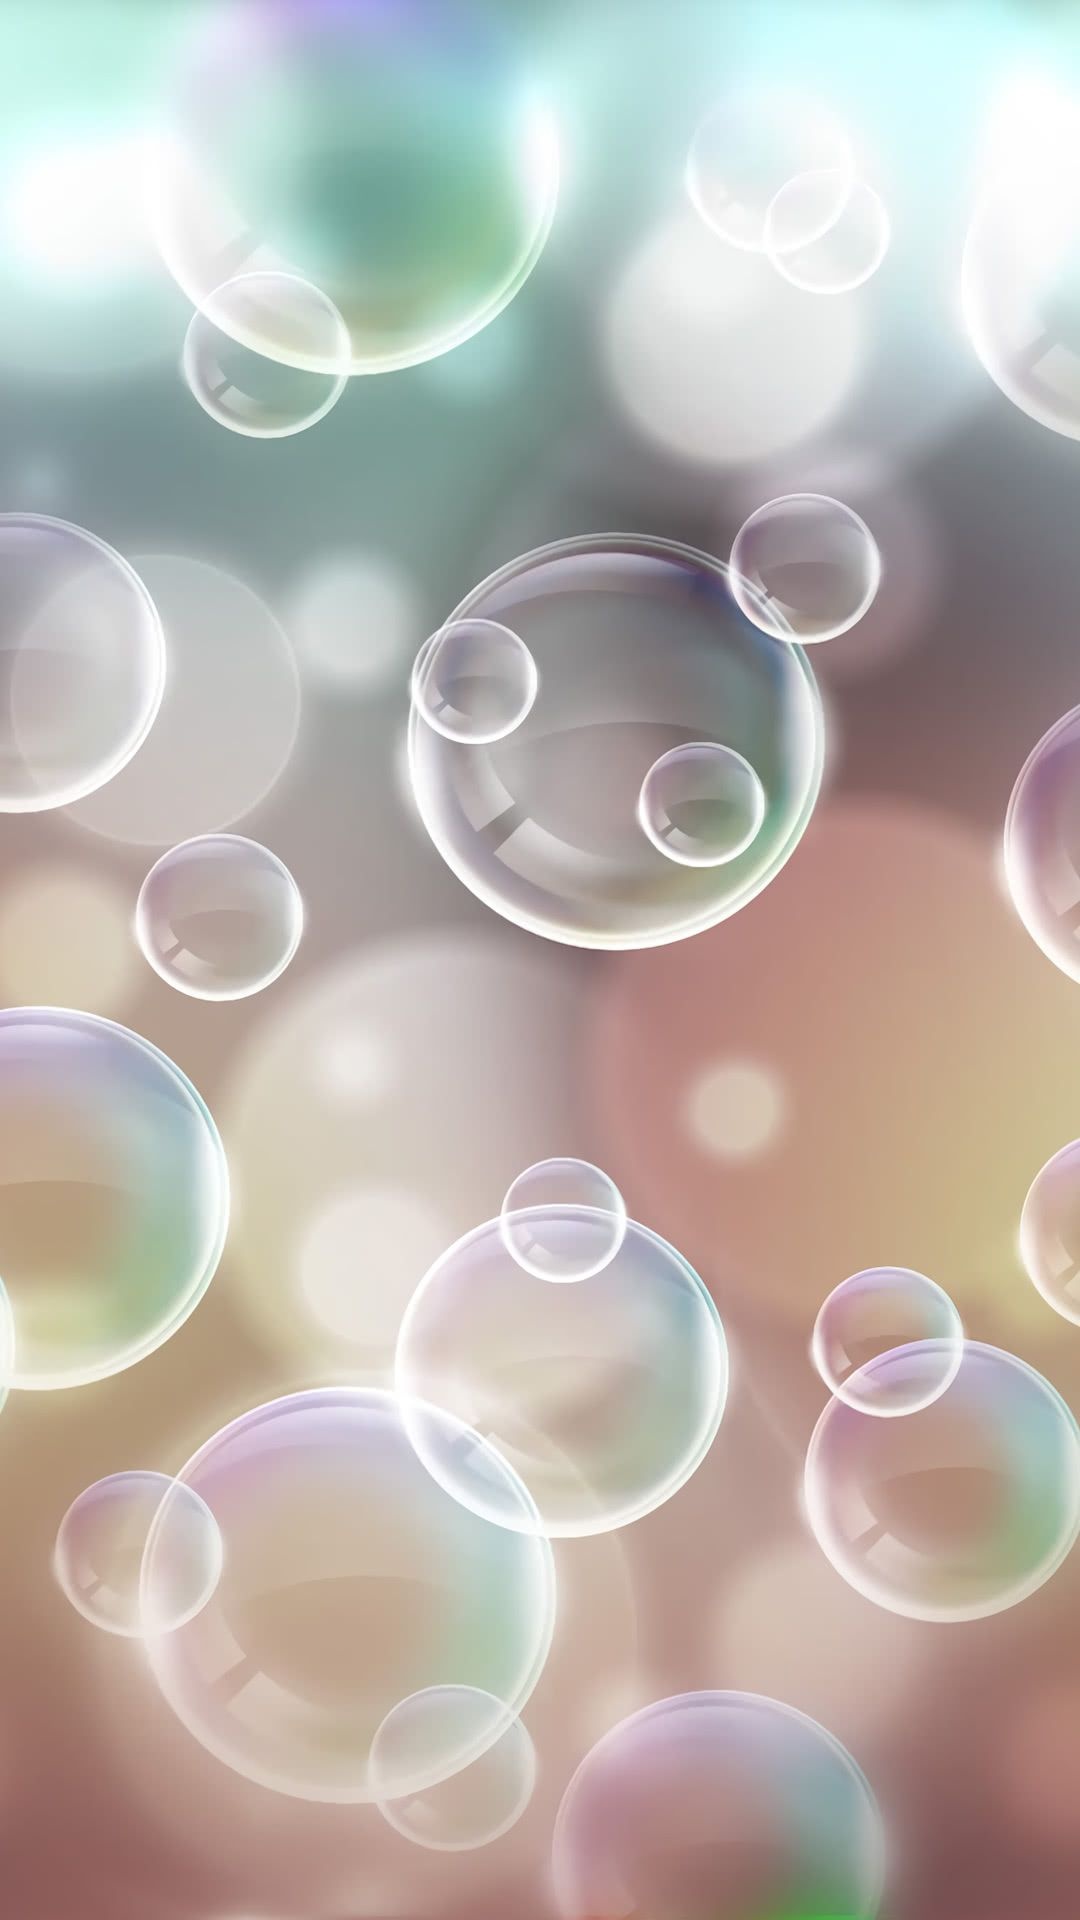 Bubbles | iPhone Wallpapers 1080x1920